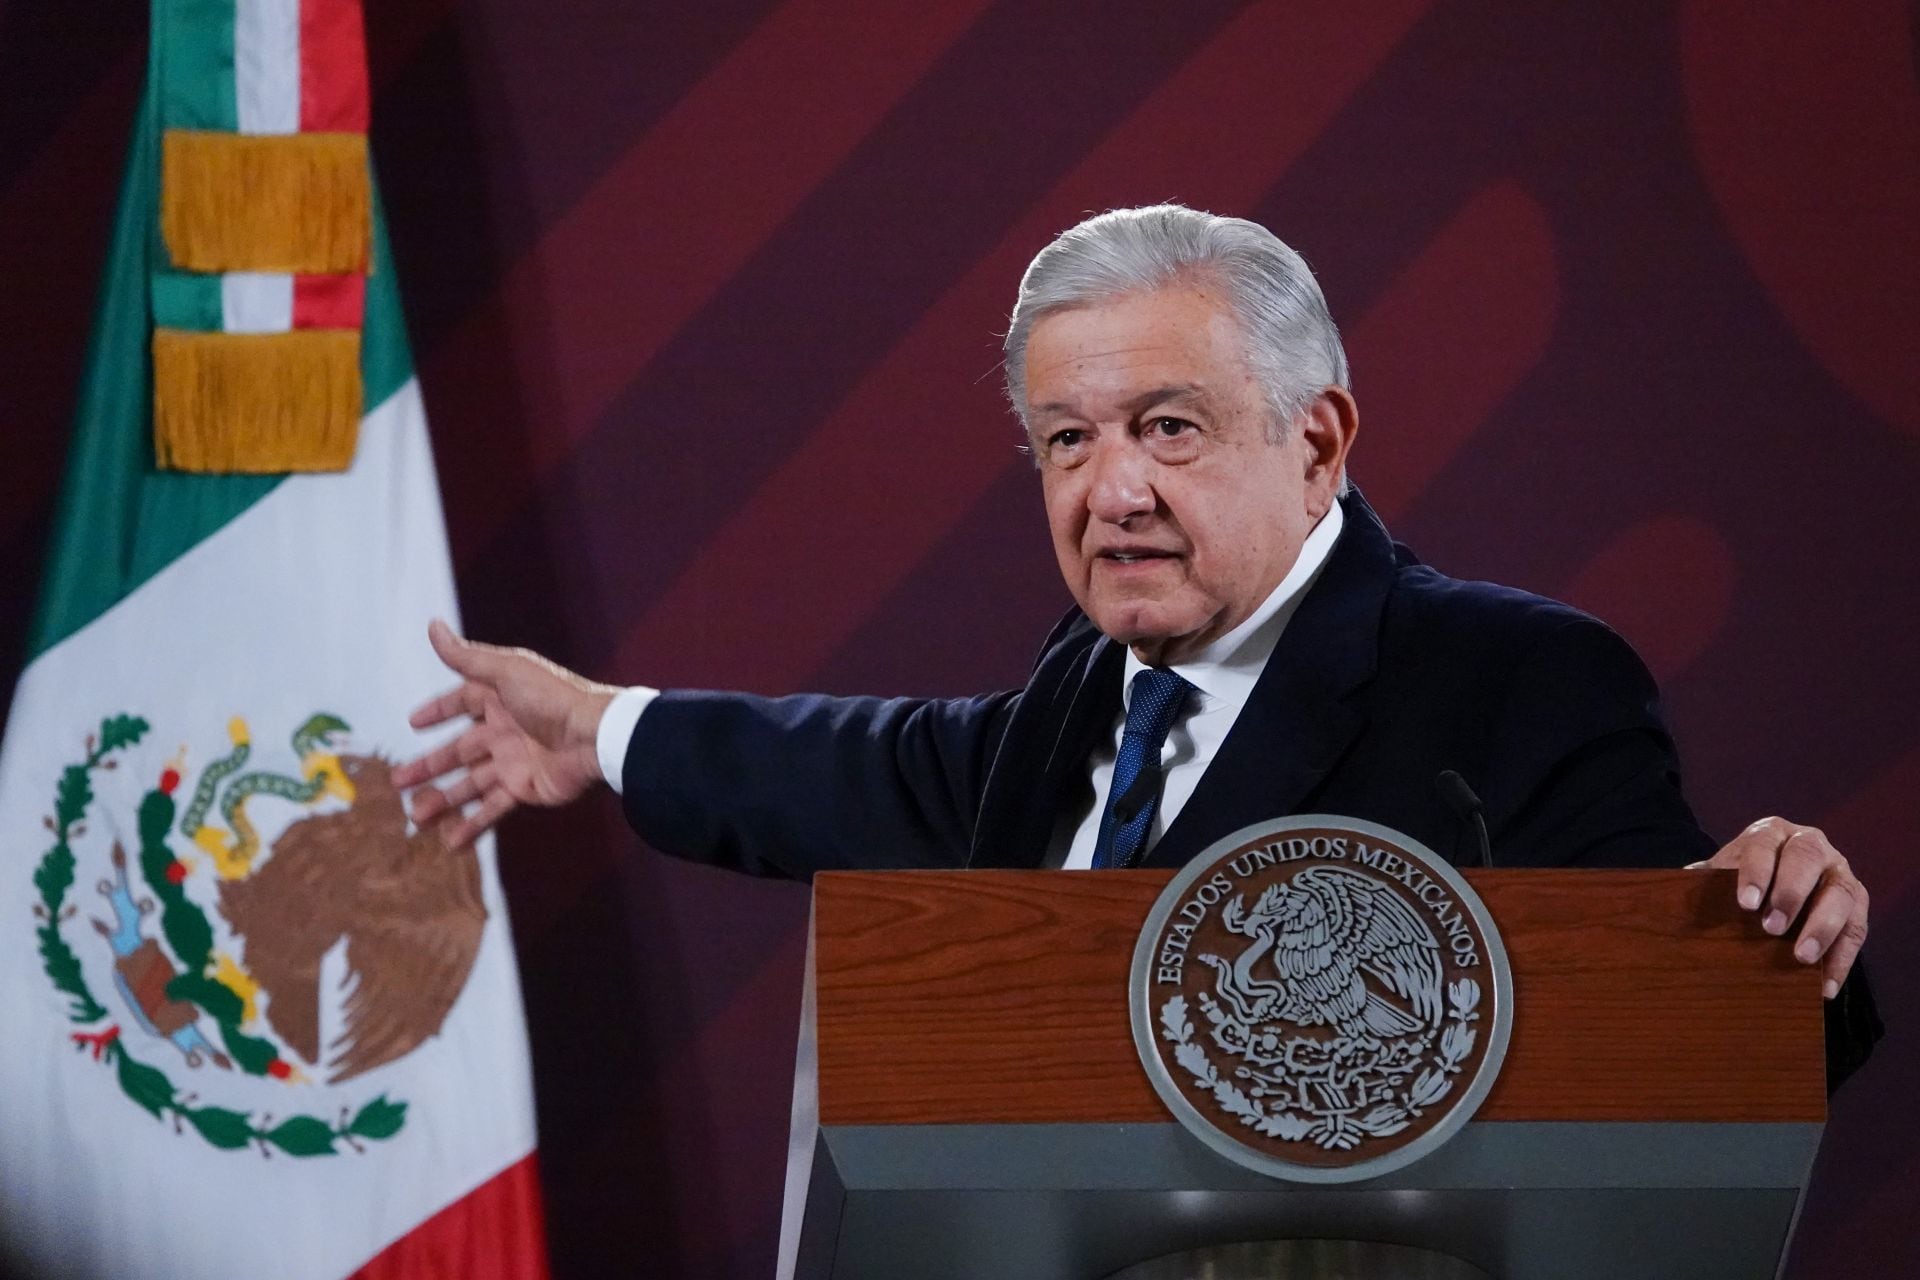 “They do nothing for their youth”: AMLO to the US for threats of invasion of Mexico